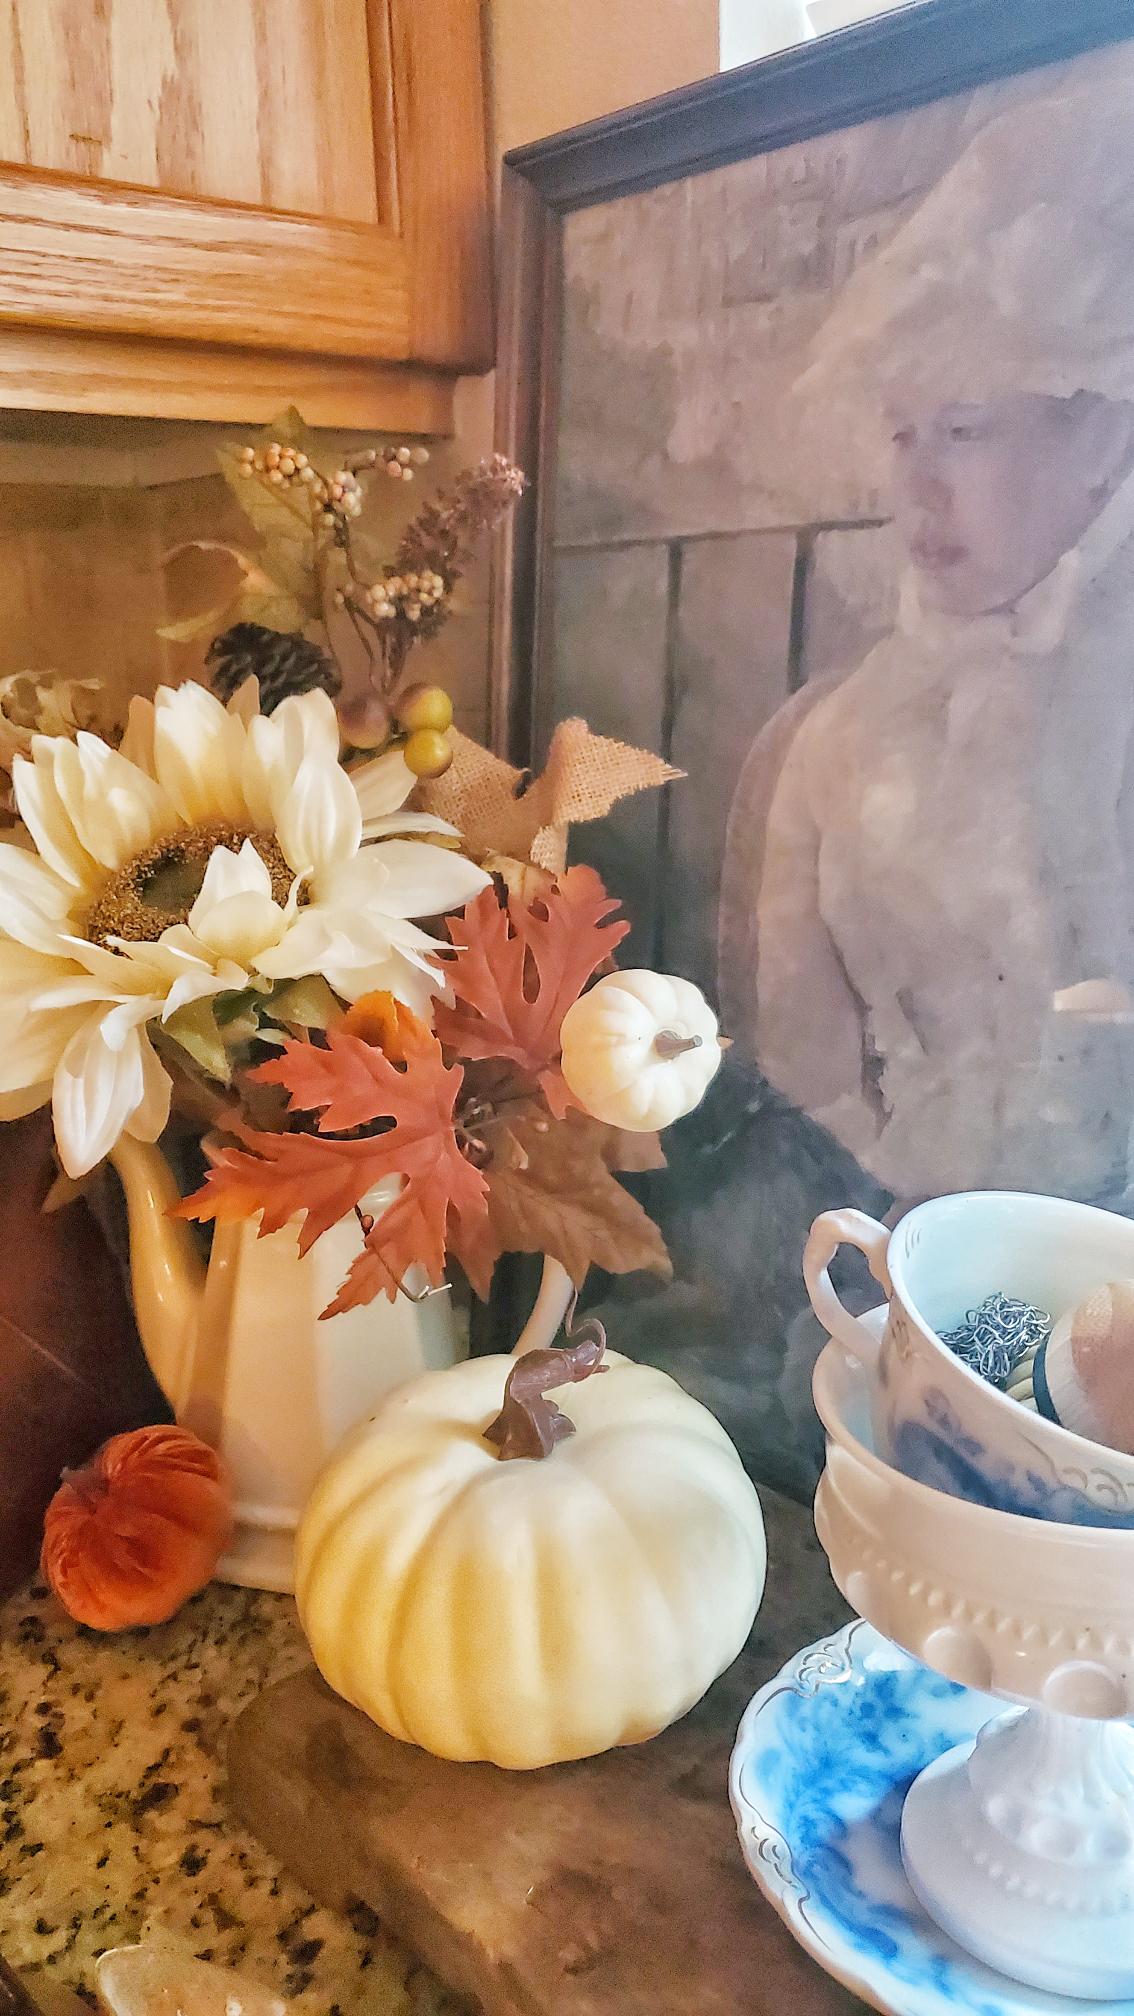 Bouquet of flowers in our kitchen. With a vintage print in the background. A large white pumpkin on top of a wooden block.